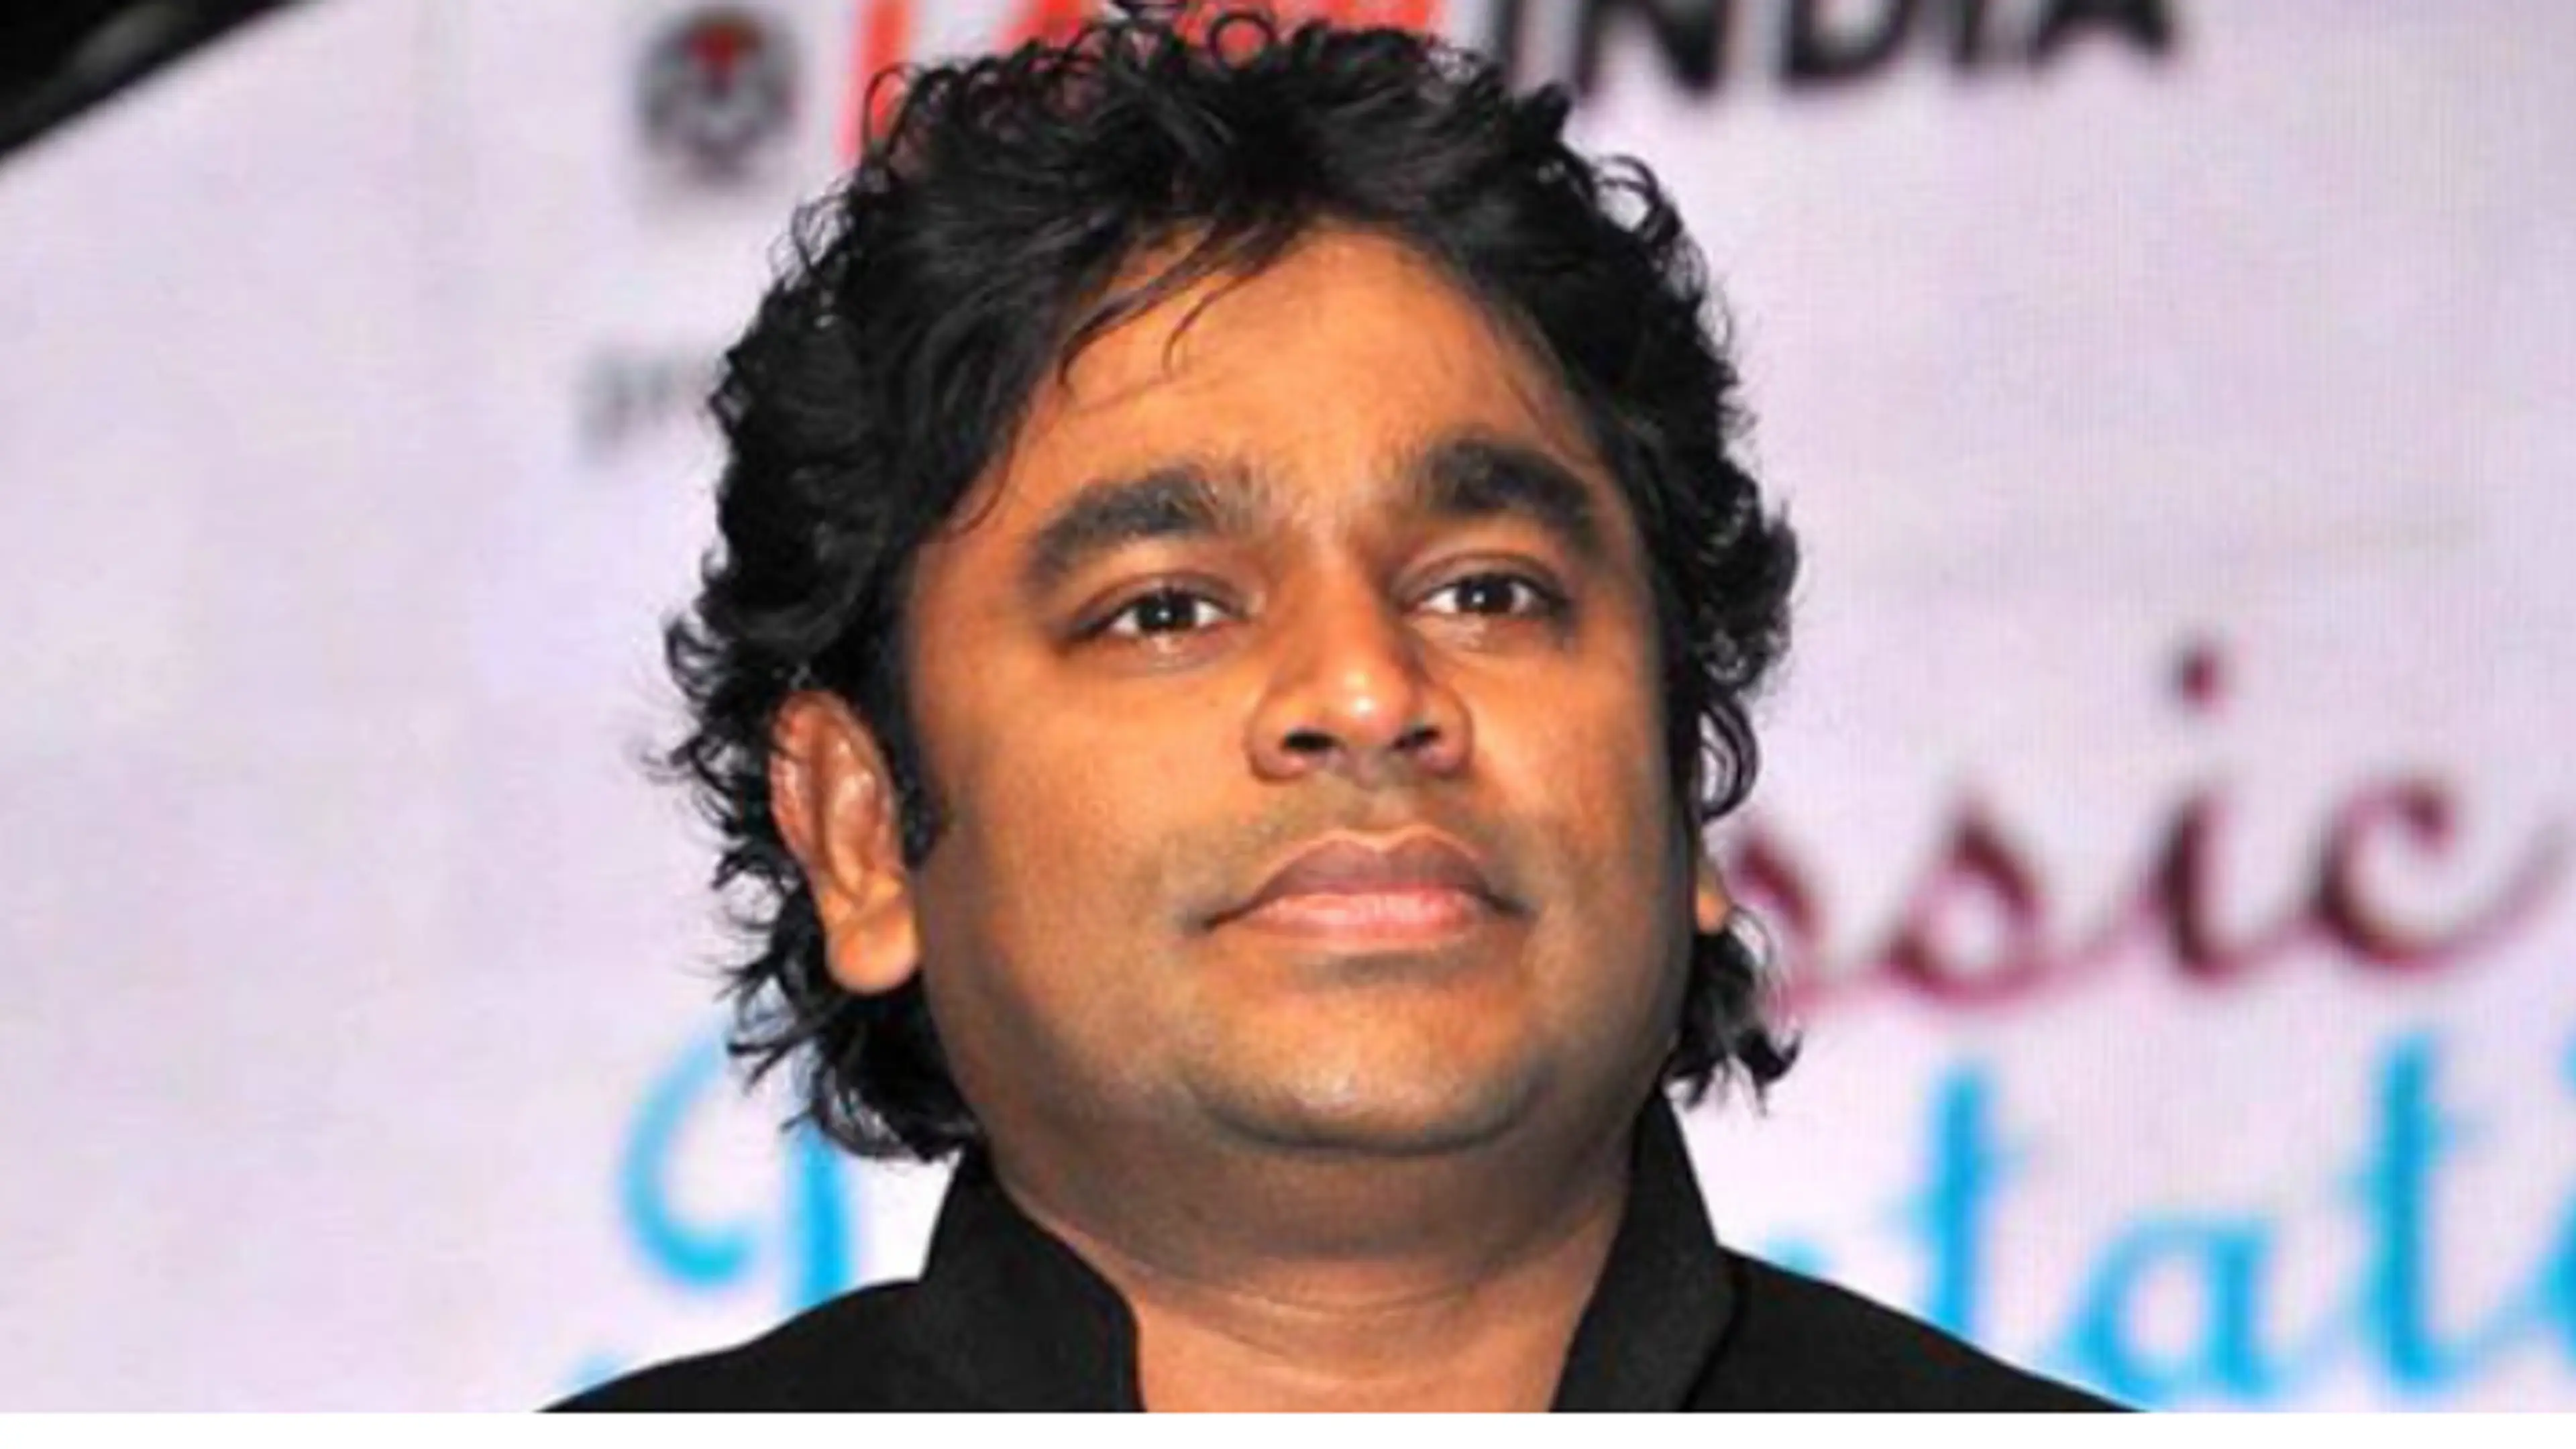 Enjoy Enjaami controversy: AR Rahman says he was only mentor to Maajja team, received no financial benefit